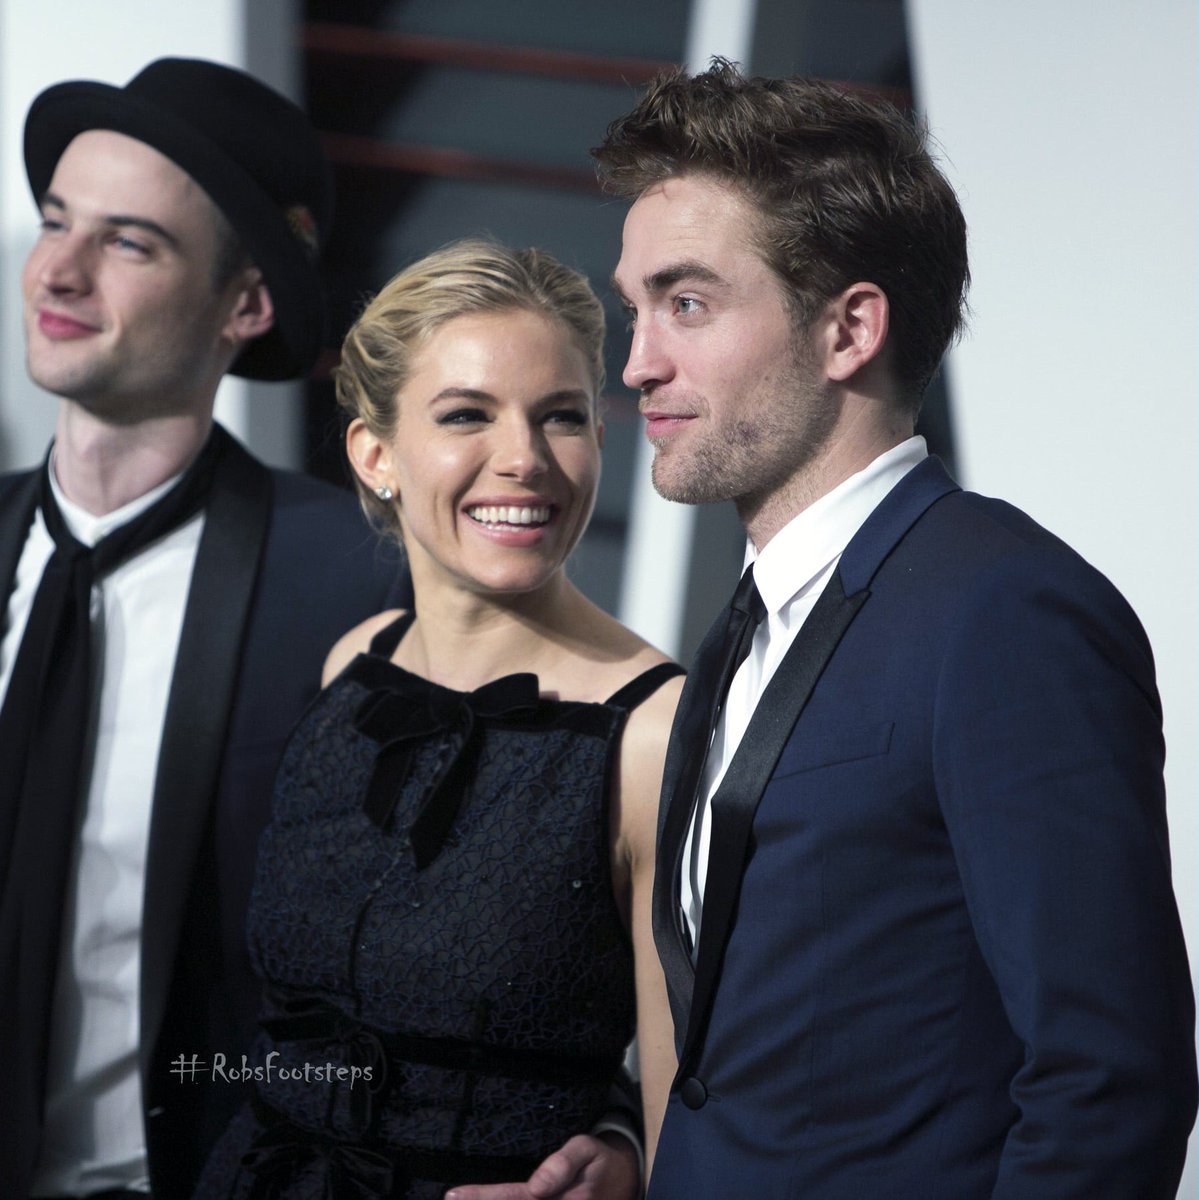 SIENNA MILLER : “Robert Pattinson is a strategist. He’s smart and he’s picked up such interesting roles with interesting filmmakers and cumulative it adds up to Batman.'
#RobertPattinson #SiennaMiller #quotes